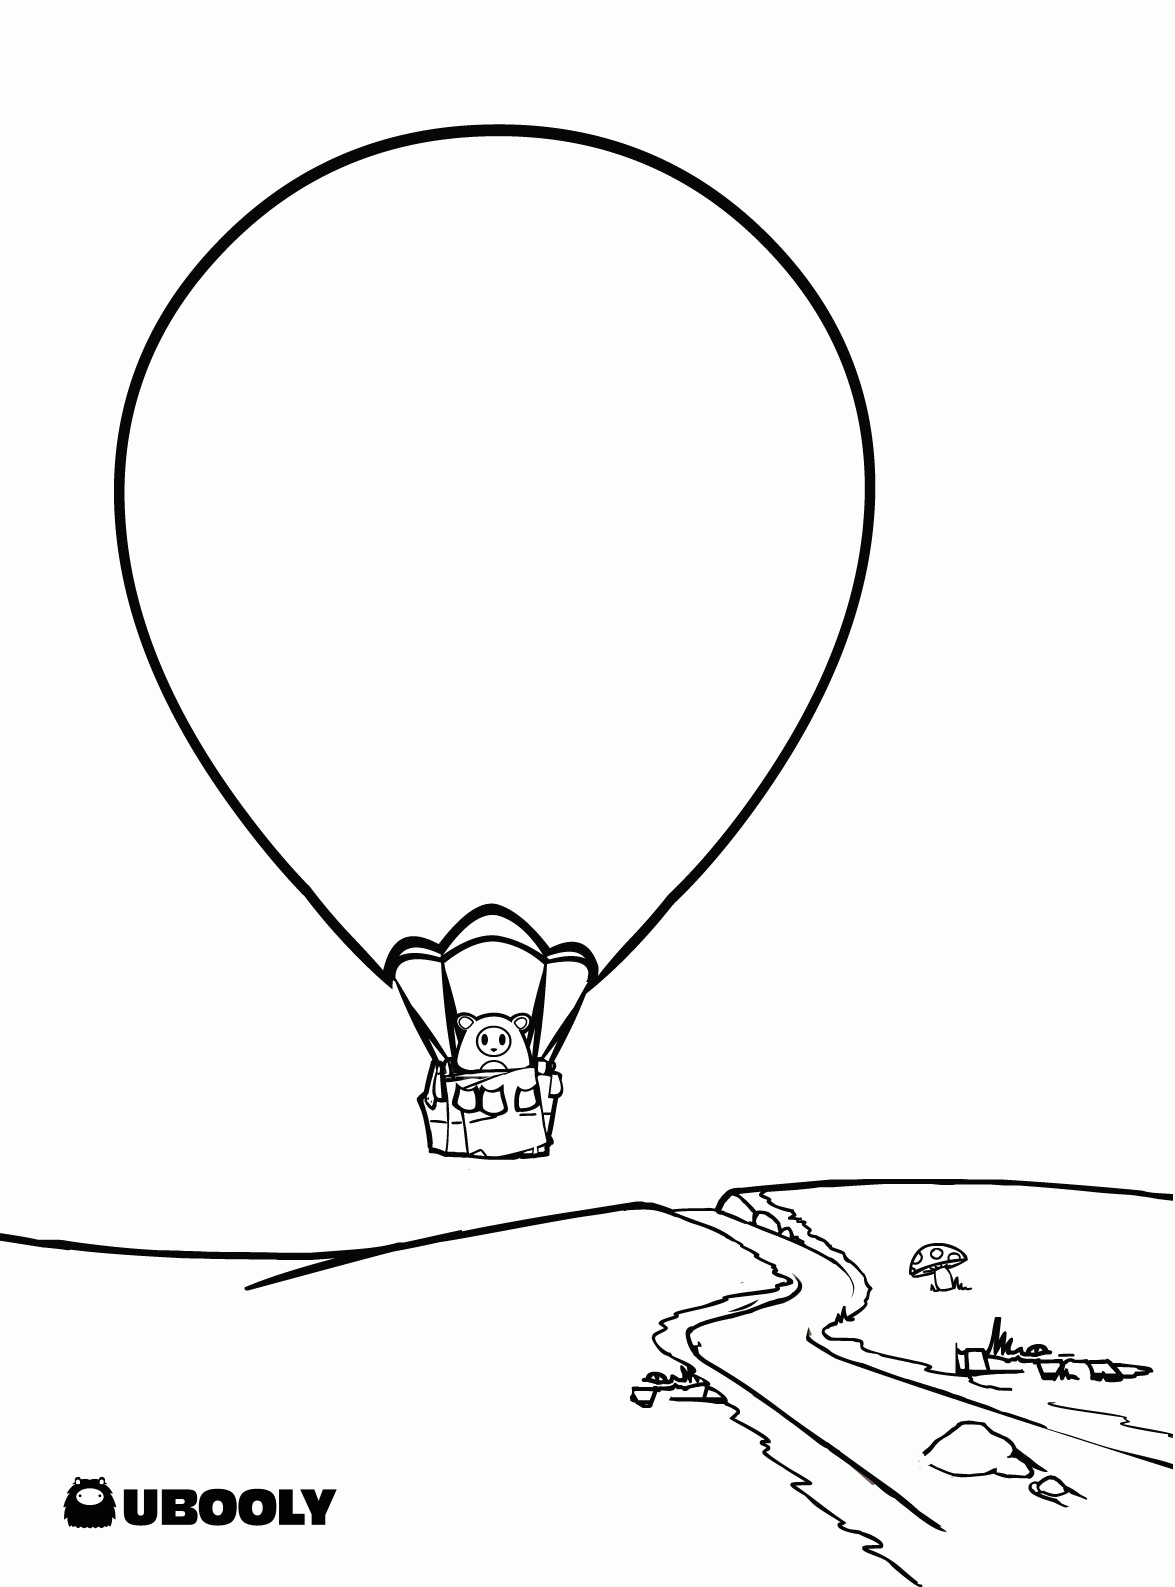 21 Free Pictures for: Balloon Coloring Pages. Temoon.us